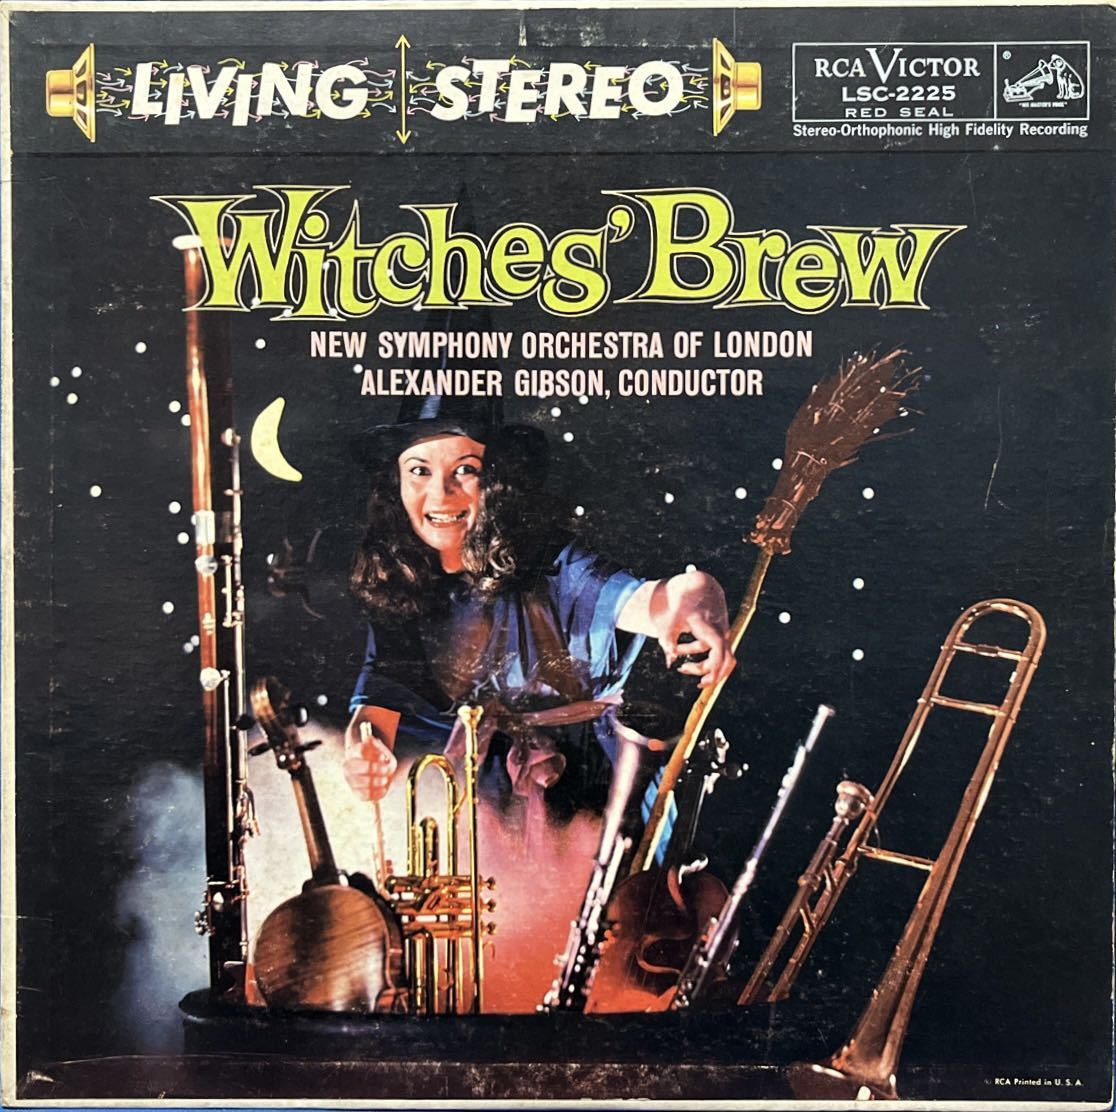 A.ギブソン(cond), ロンドン新交響楽団 / WITCHES’BREW 米 RCA LSC-2225 STEREO DG 3S/1S